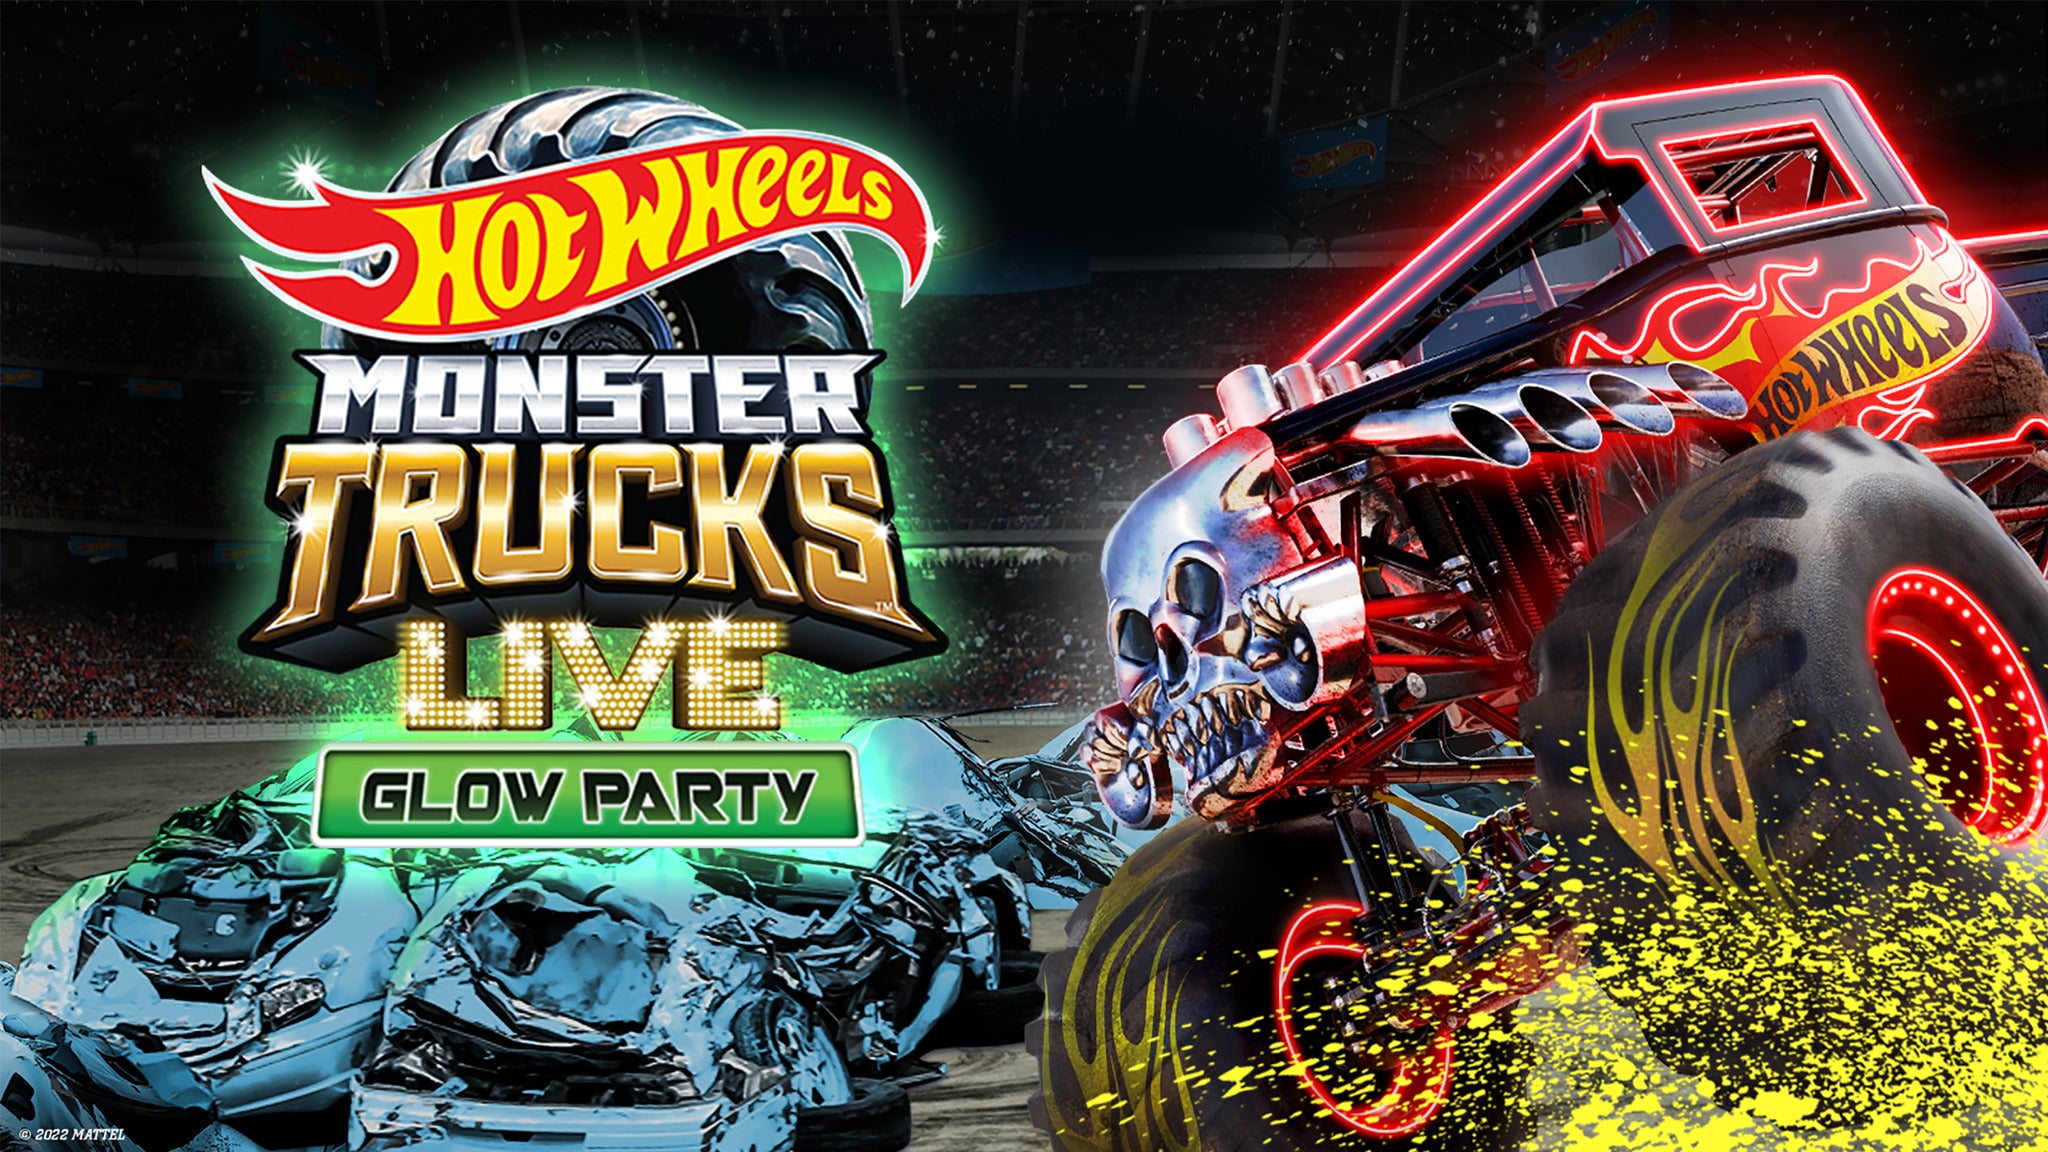 Hot Wheels Monster Trucks Live Glow Party at Toyota Arena